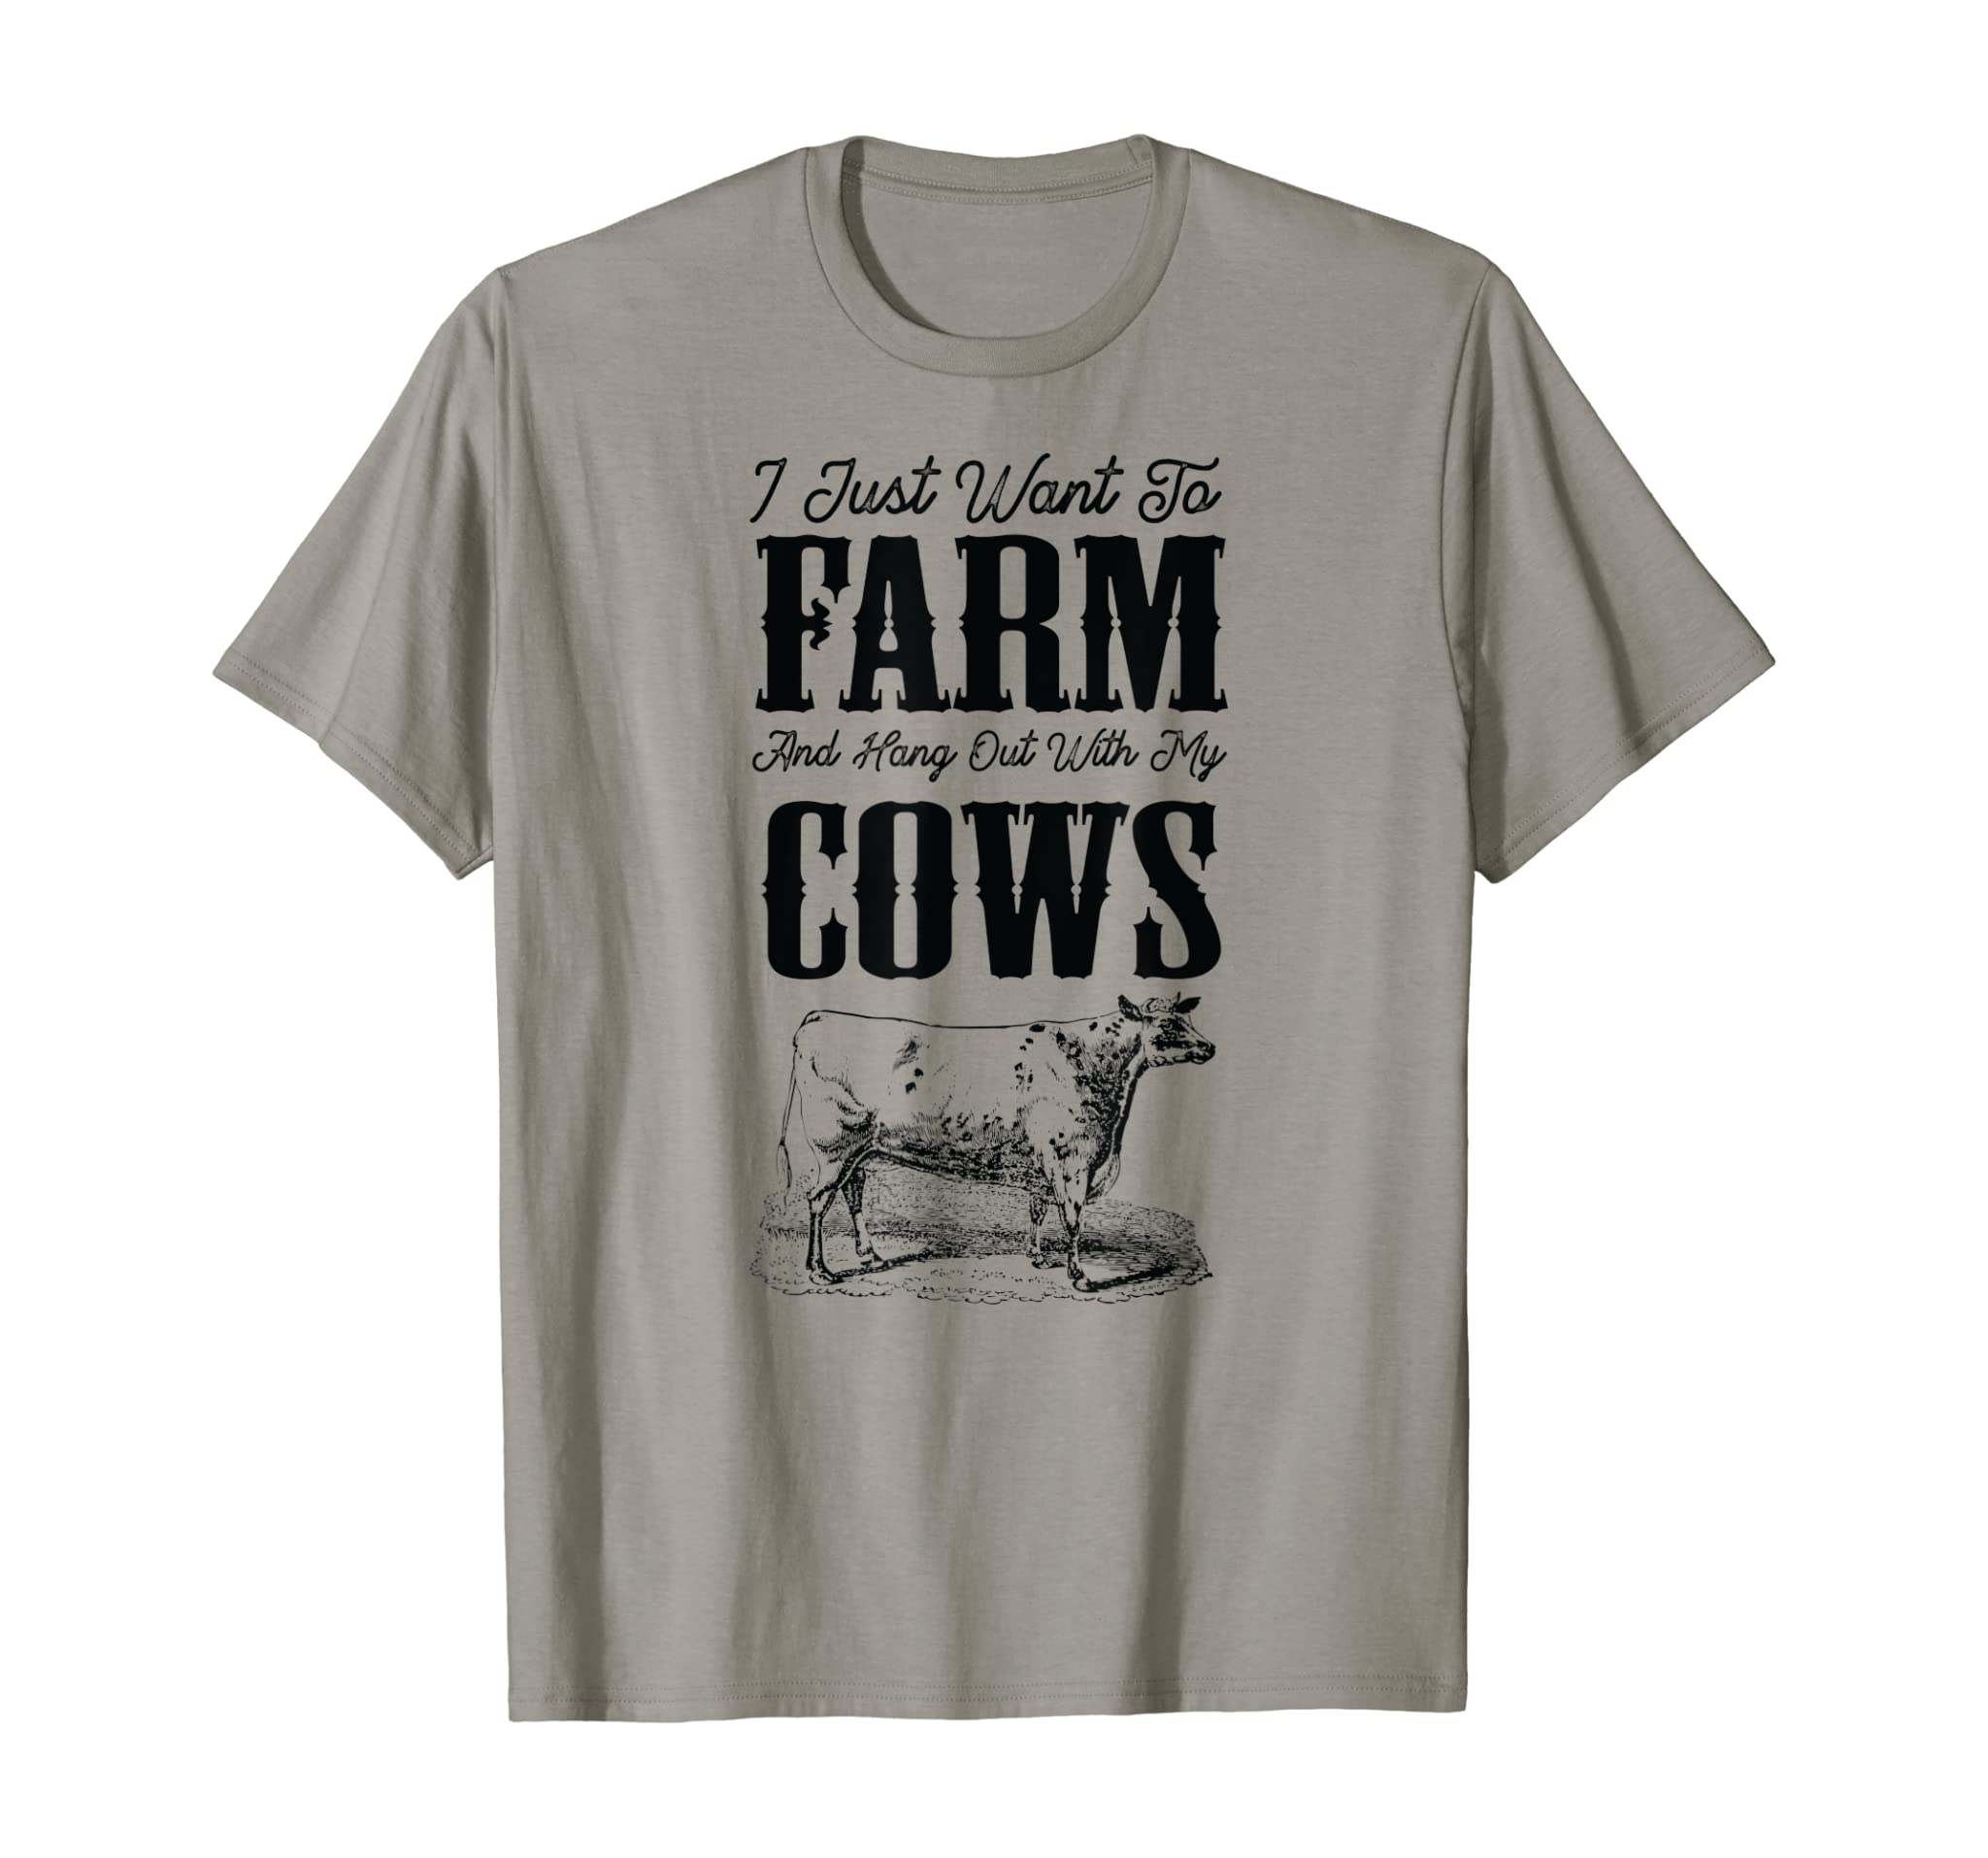 I Just Want To Farm And Hang Out With My Cows Cattle Farm Dk T-Shirt